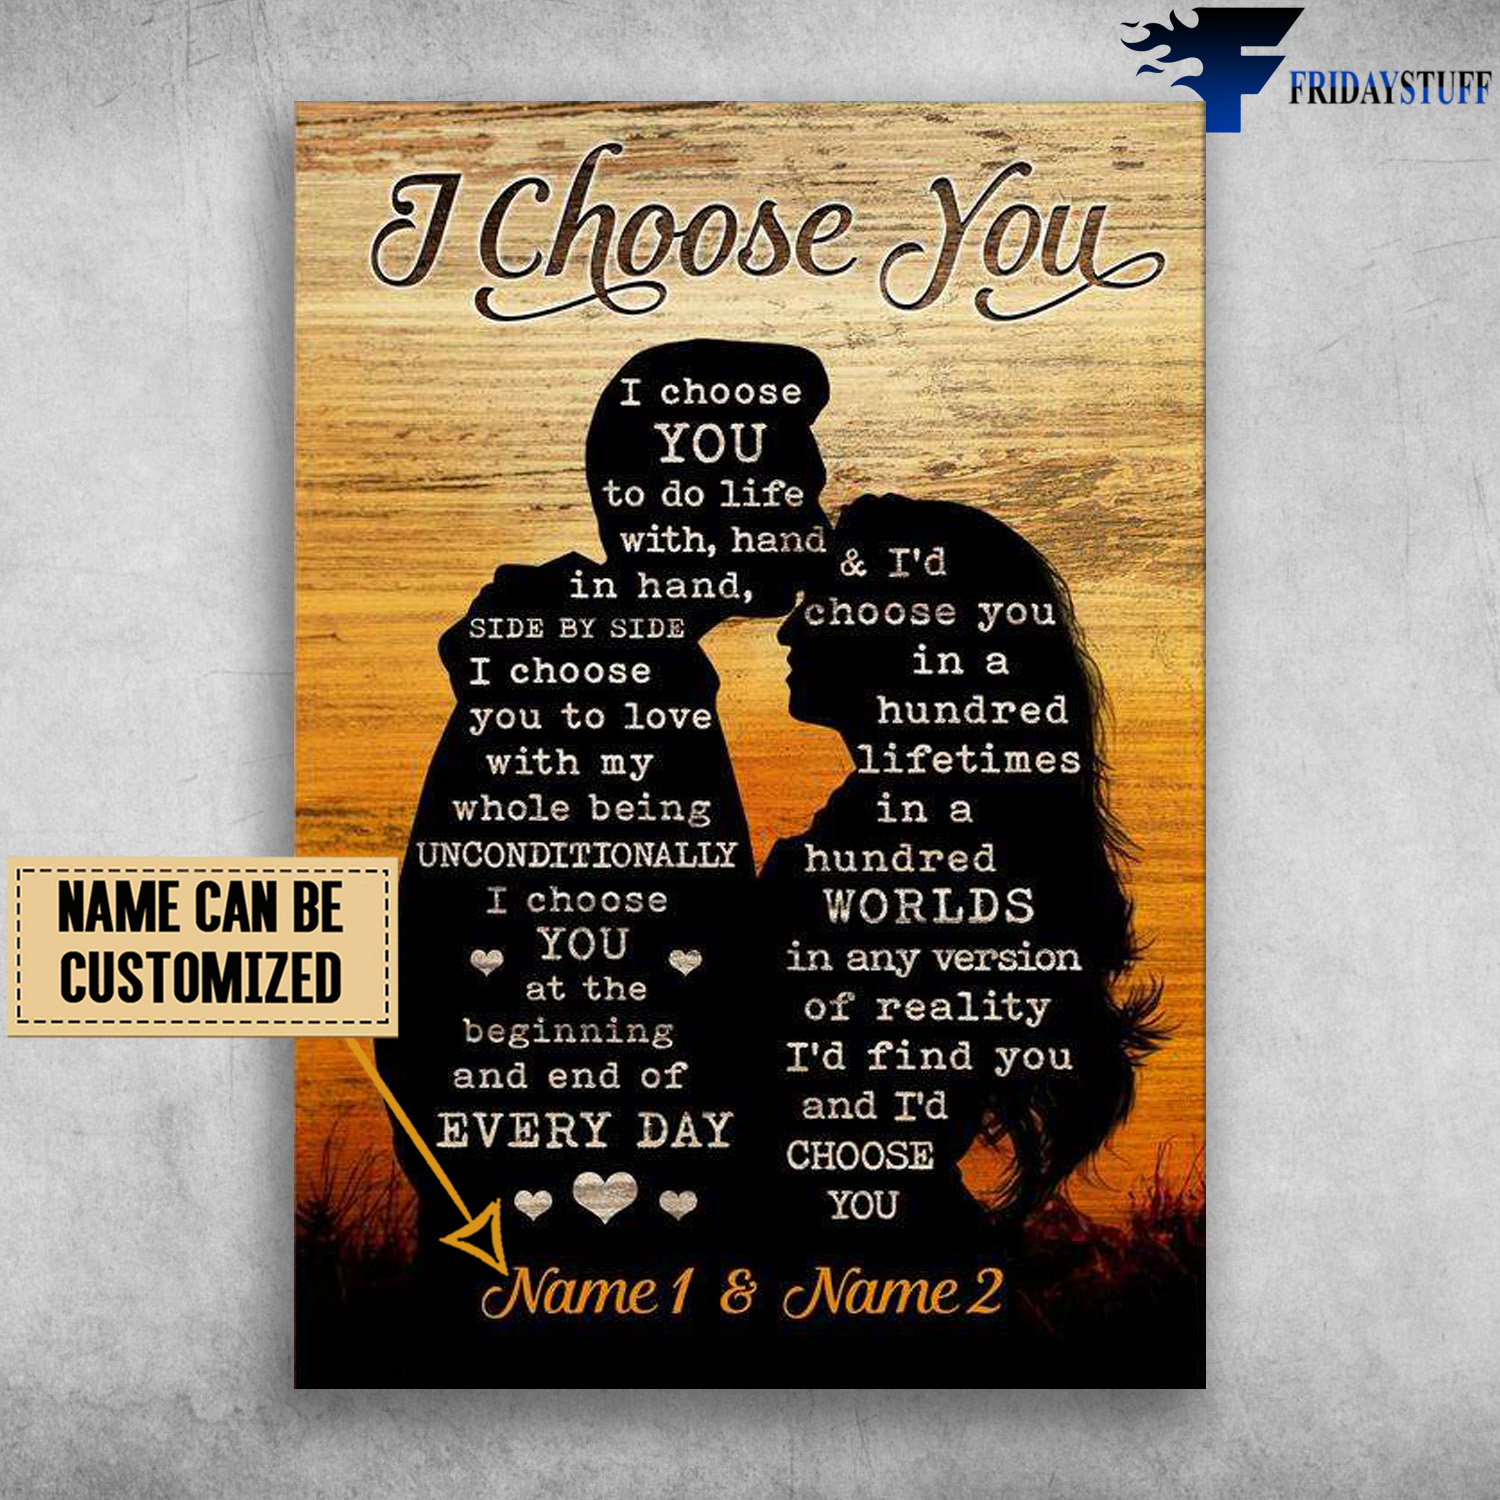 Loving Couple, I Choose You, To Do Life With Hand In Hand, Side By Side, I Choose You To Love With My Whole Being Unconditionally, I Choose You, At The Beginning And End Of Everyday